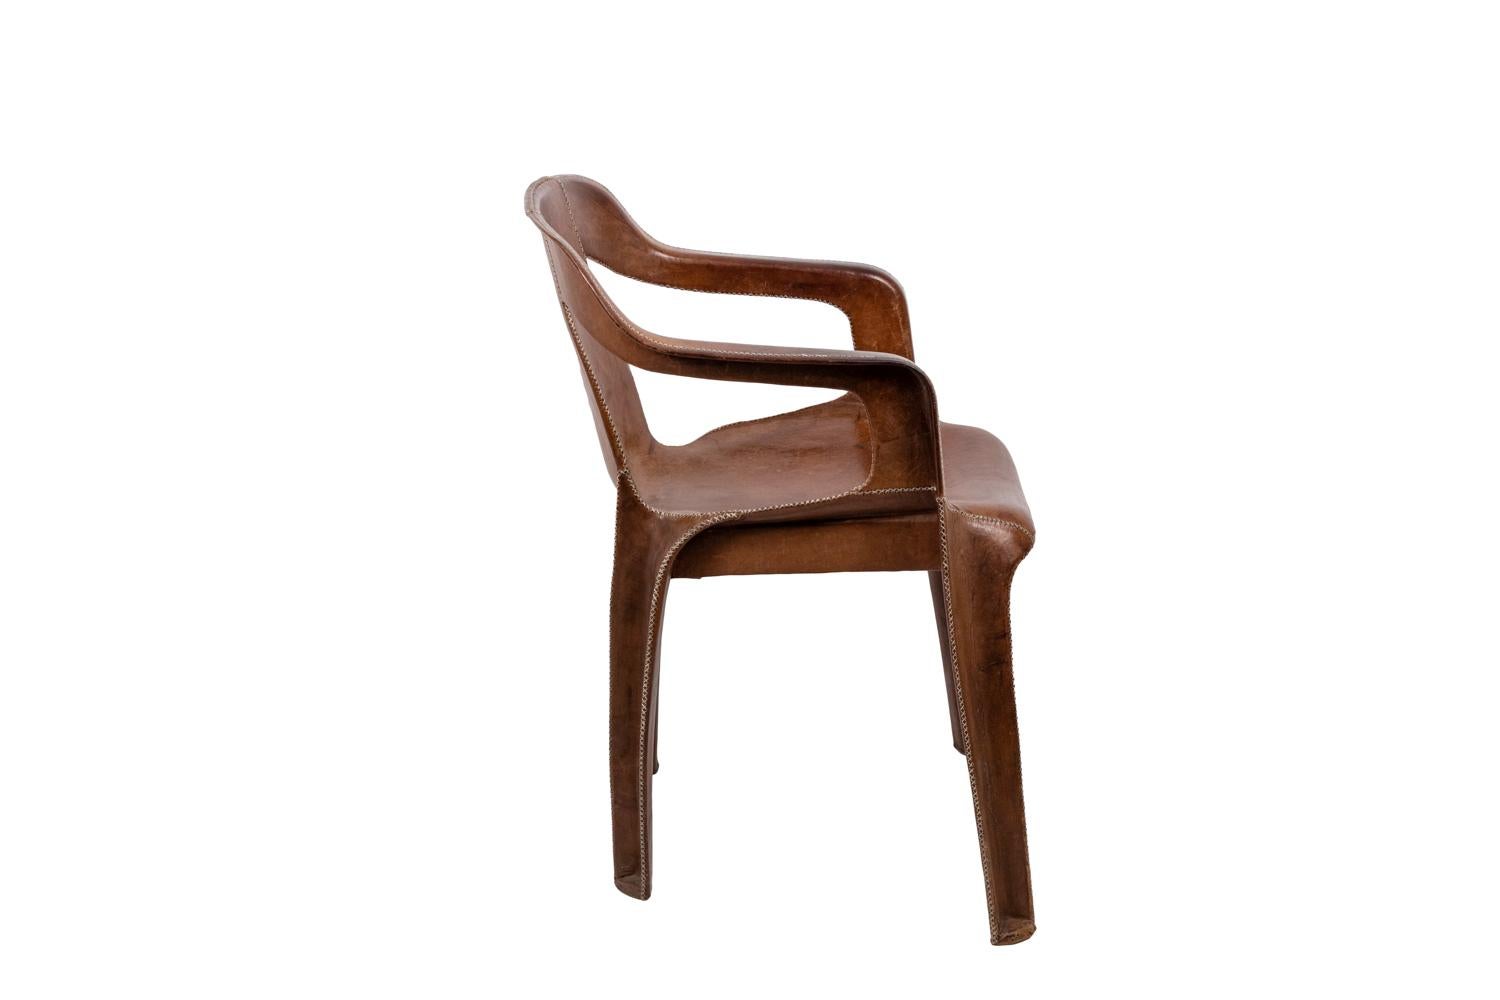 Spanish Sol&Luna, Armchair in Brown Leather, Contemporary Work For Sale